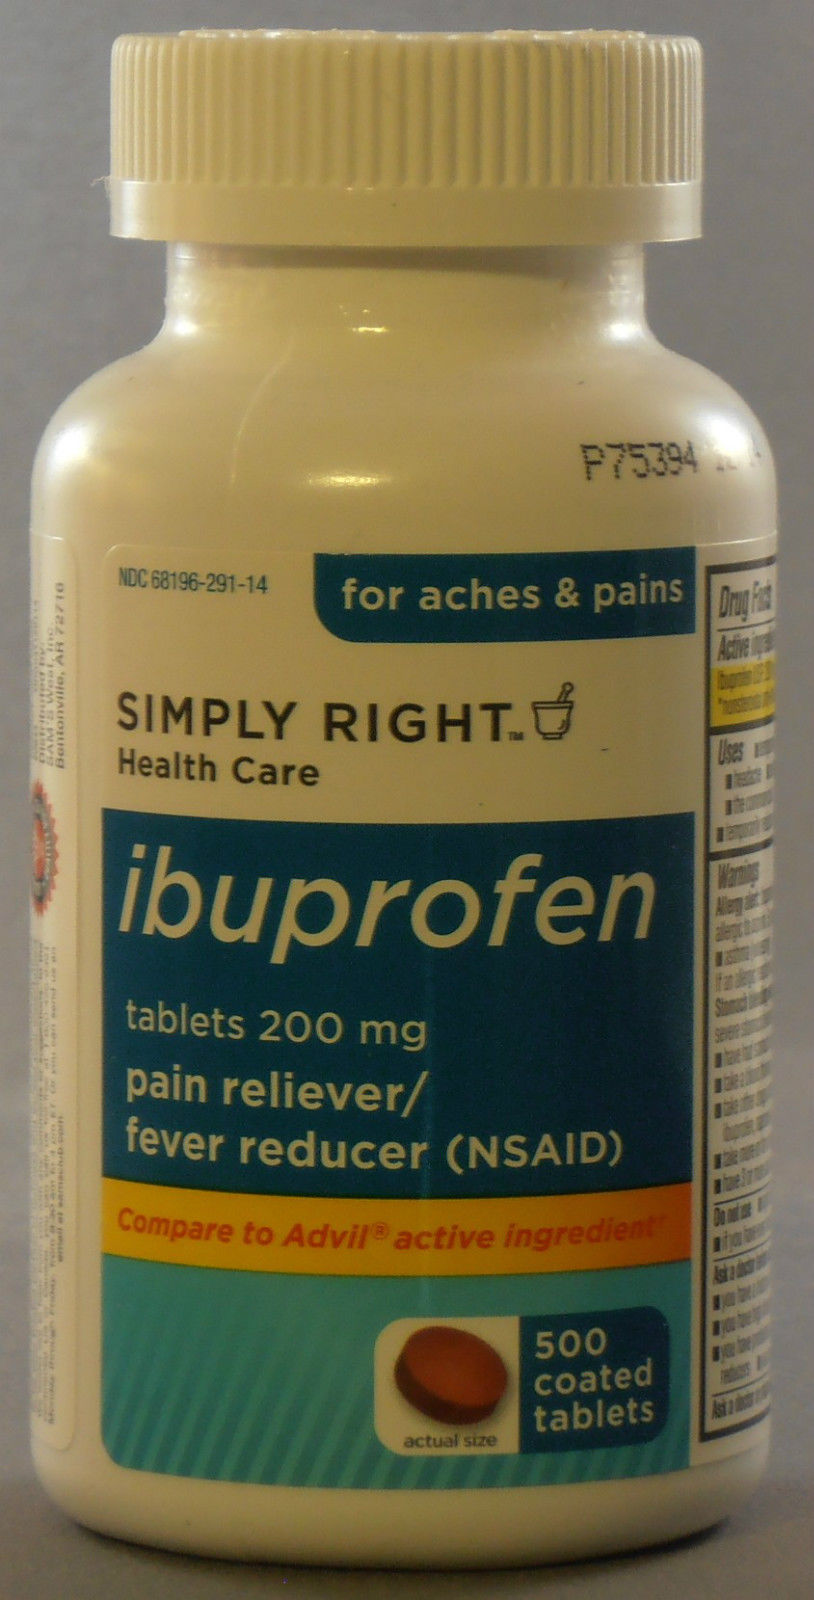 500ct Generic Ibuprofen Pain / Fever Reducer 200mg (NSAID) Coated Tablets NEW -- US Delivery